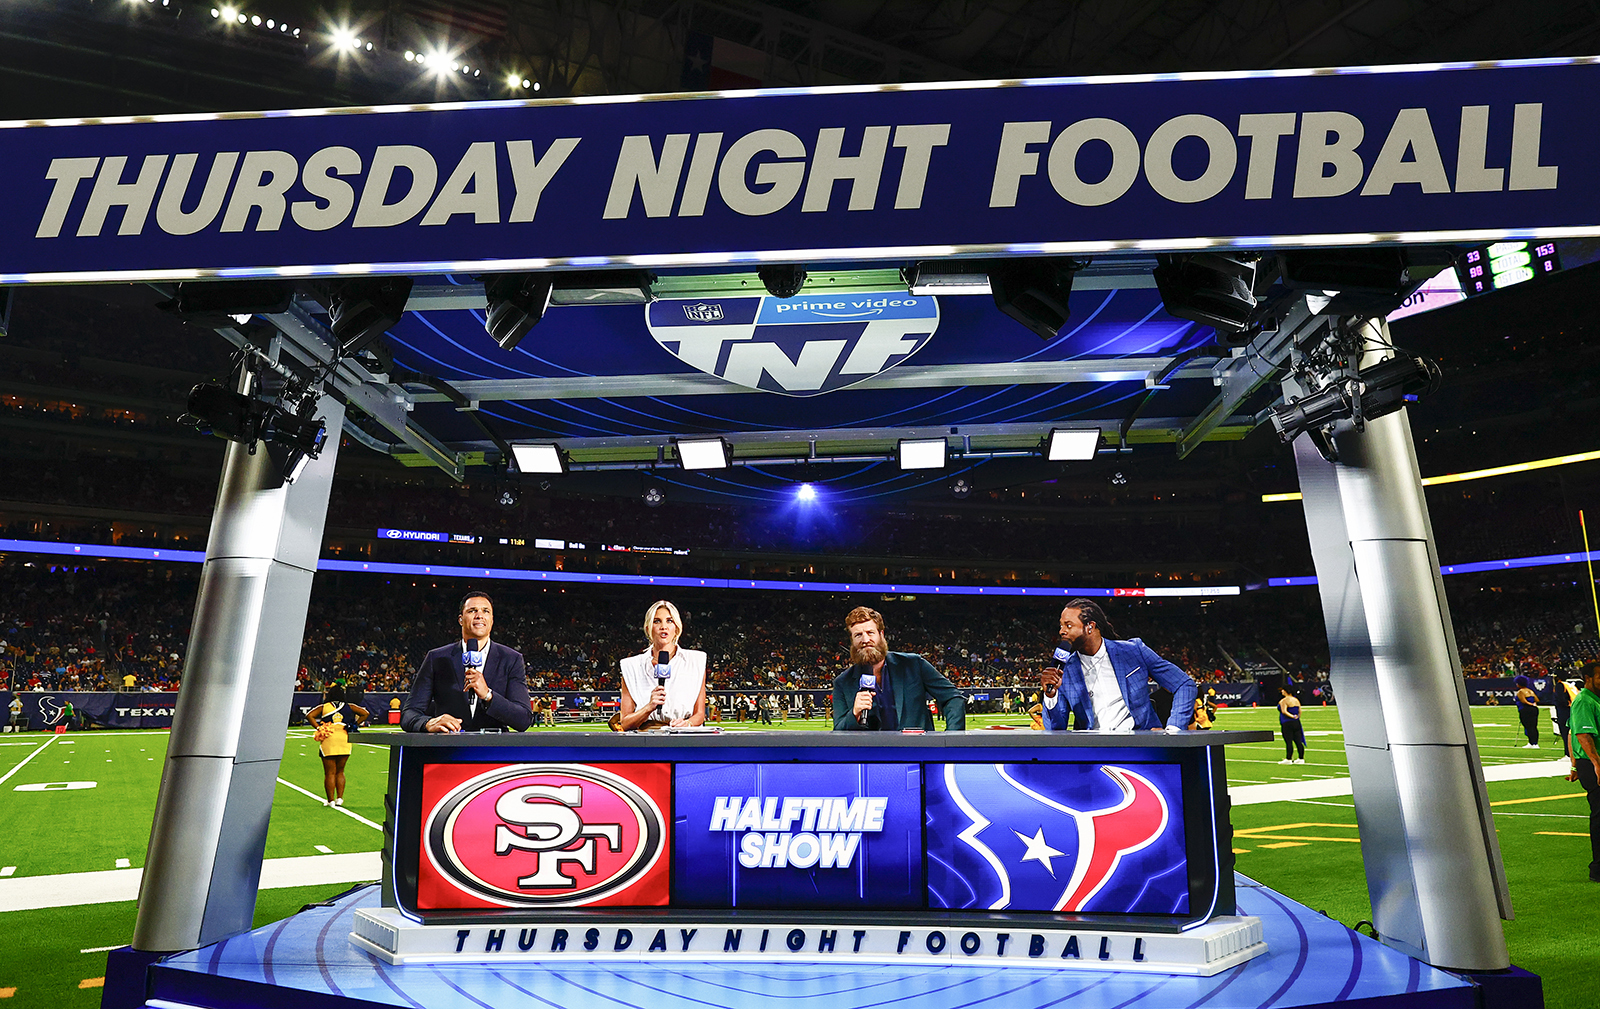 Prime Video Announces Upcoming NFL Thursday Night Football